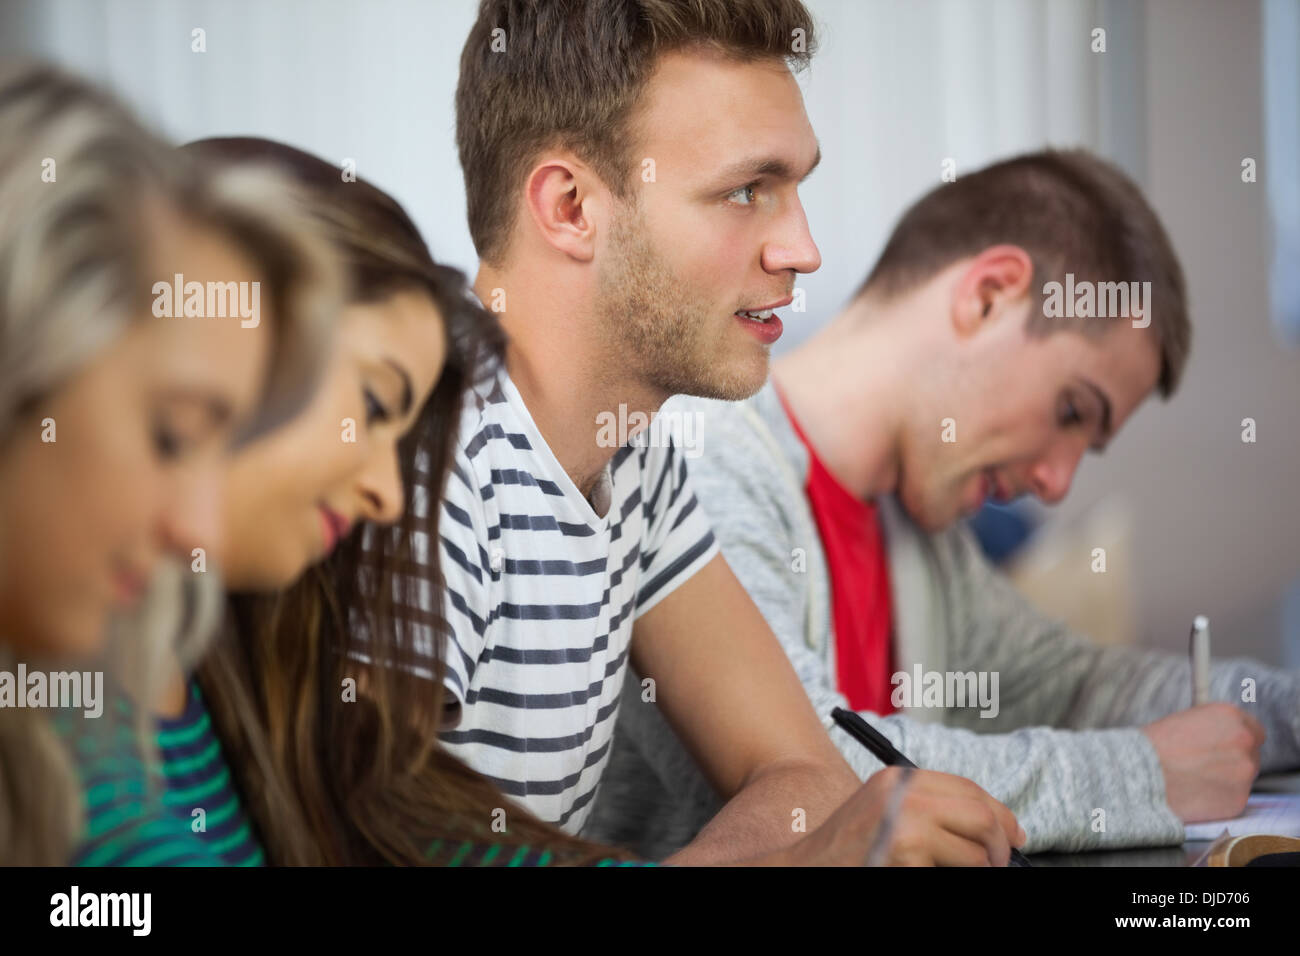 Casual attentive students taking notes Stock Photo